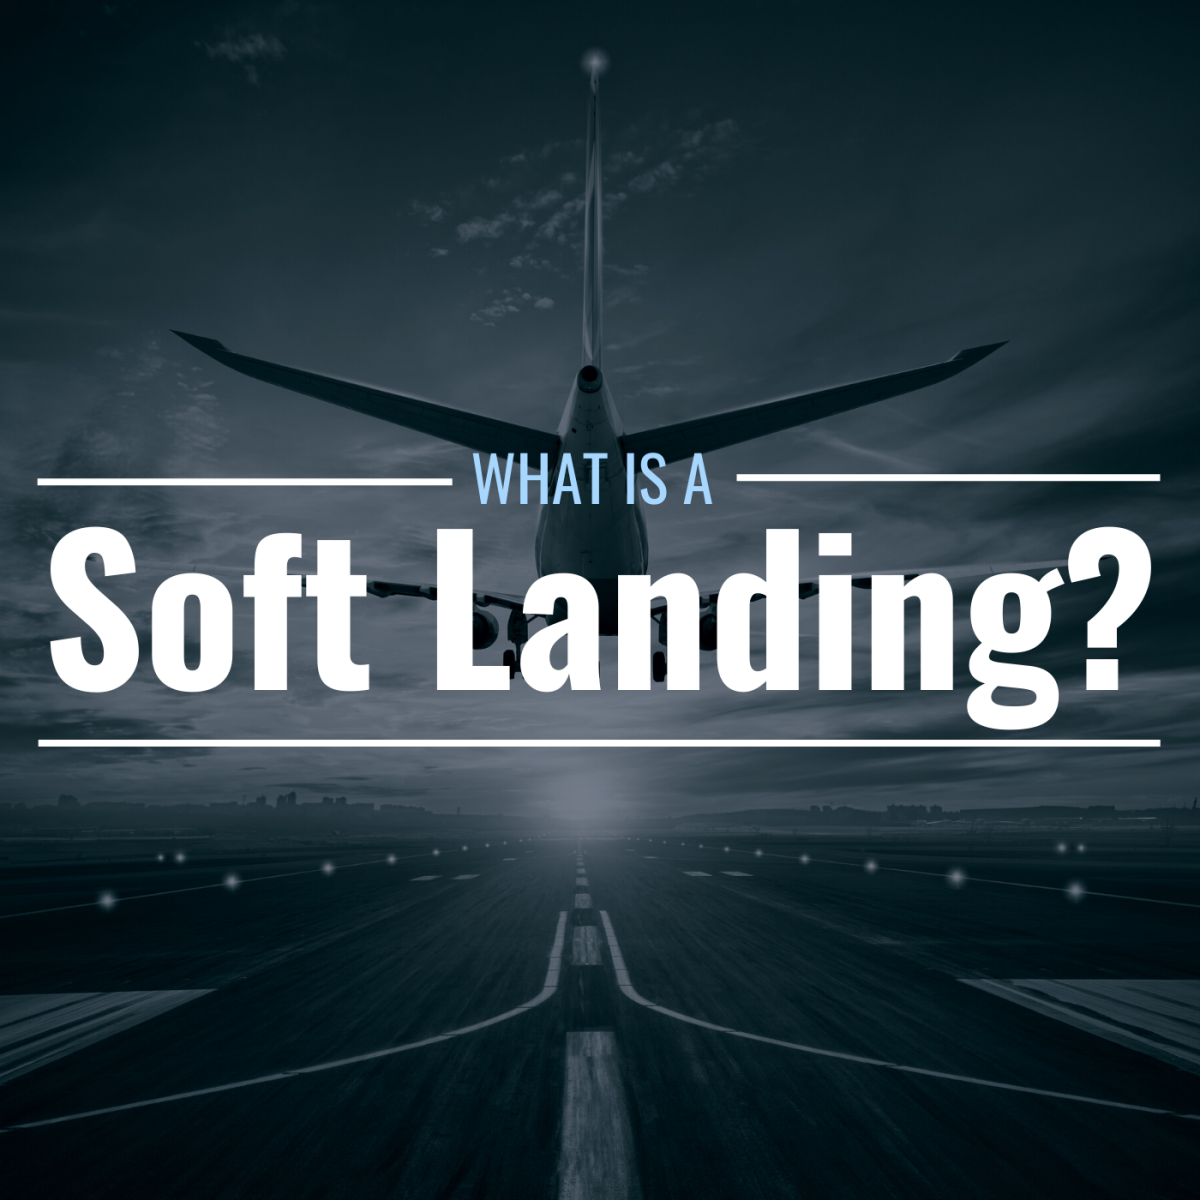 Image of an airplane approaching the runway with text overlay: "What Is a Soft Landing?"